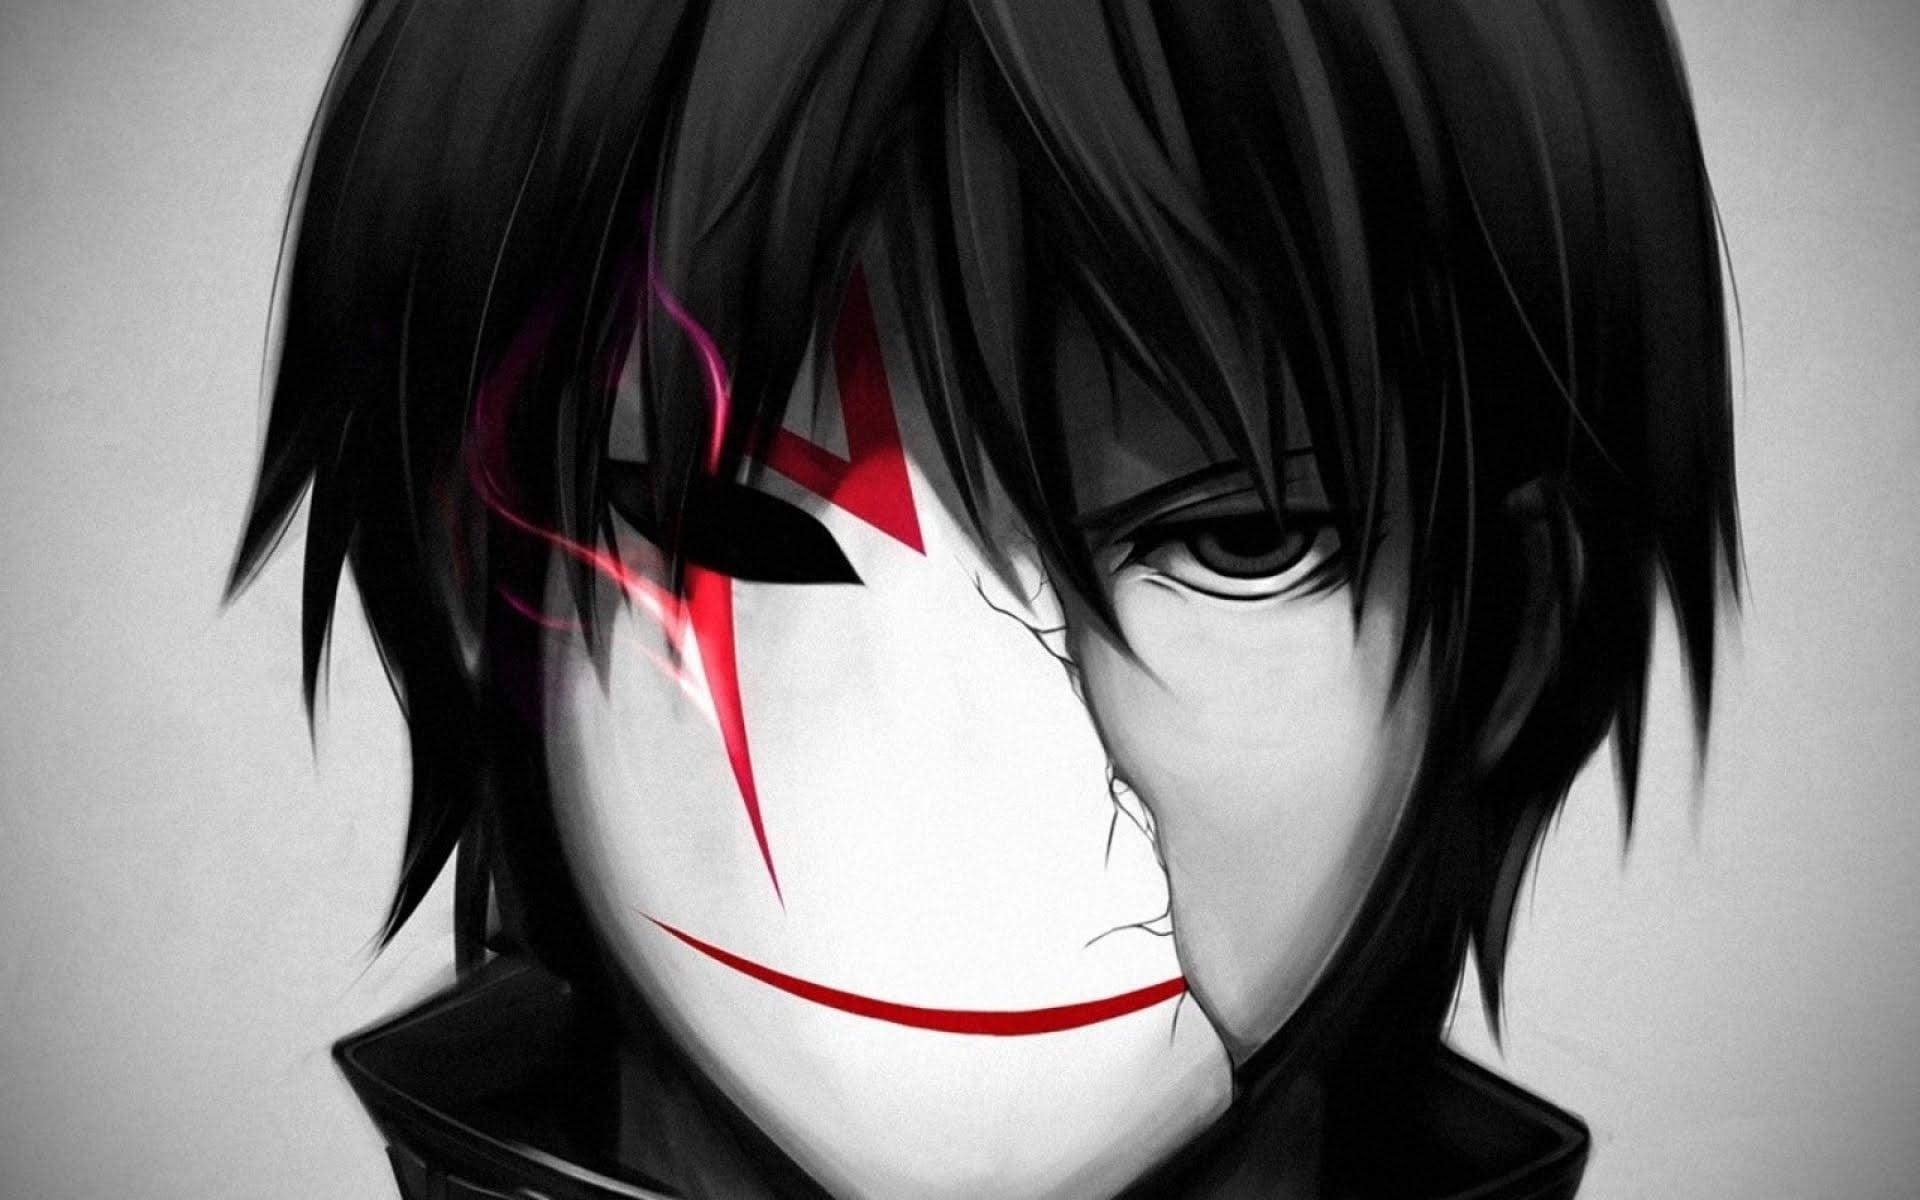 Grayscale photo of male anime character with white and red